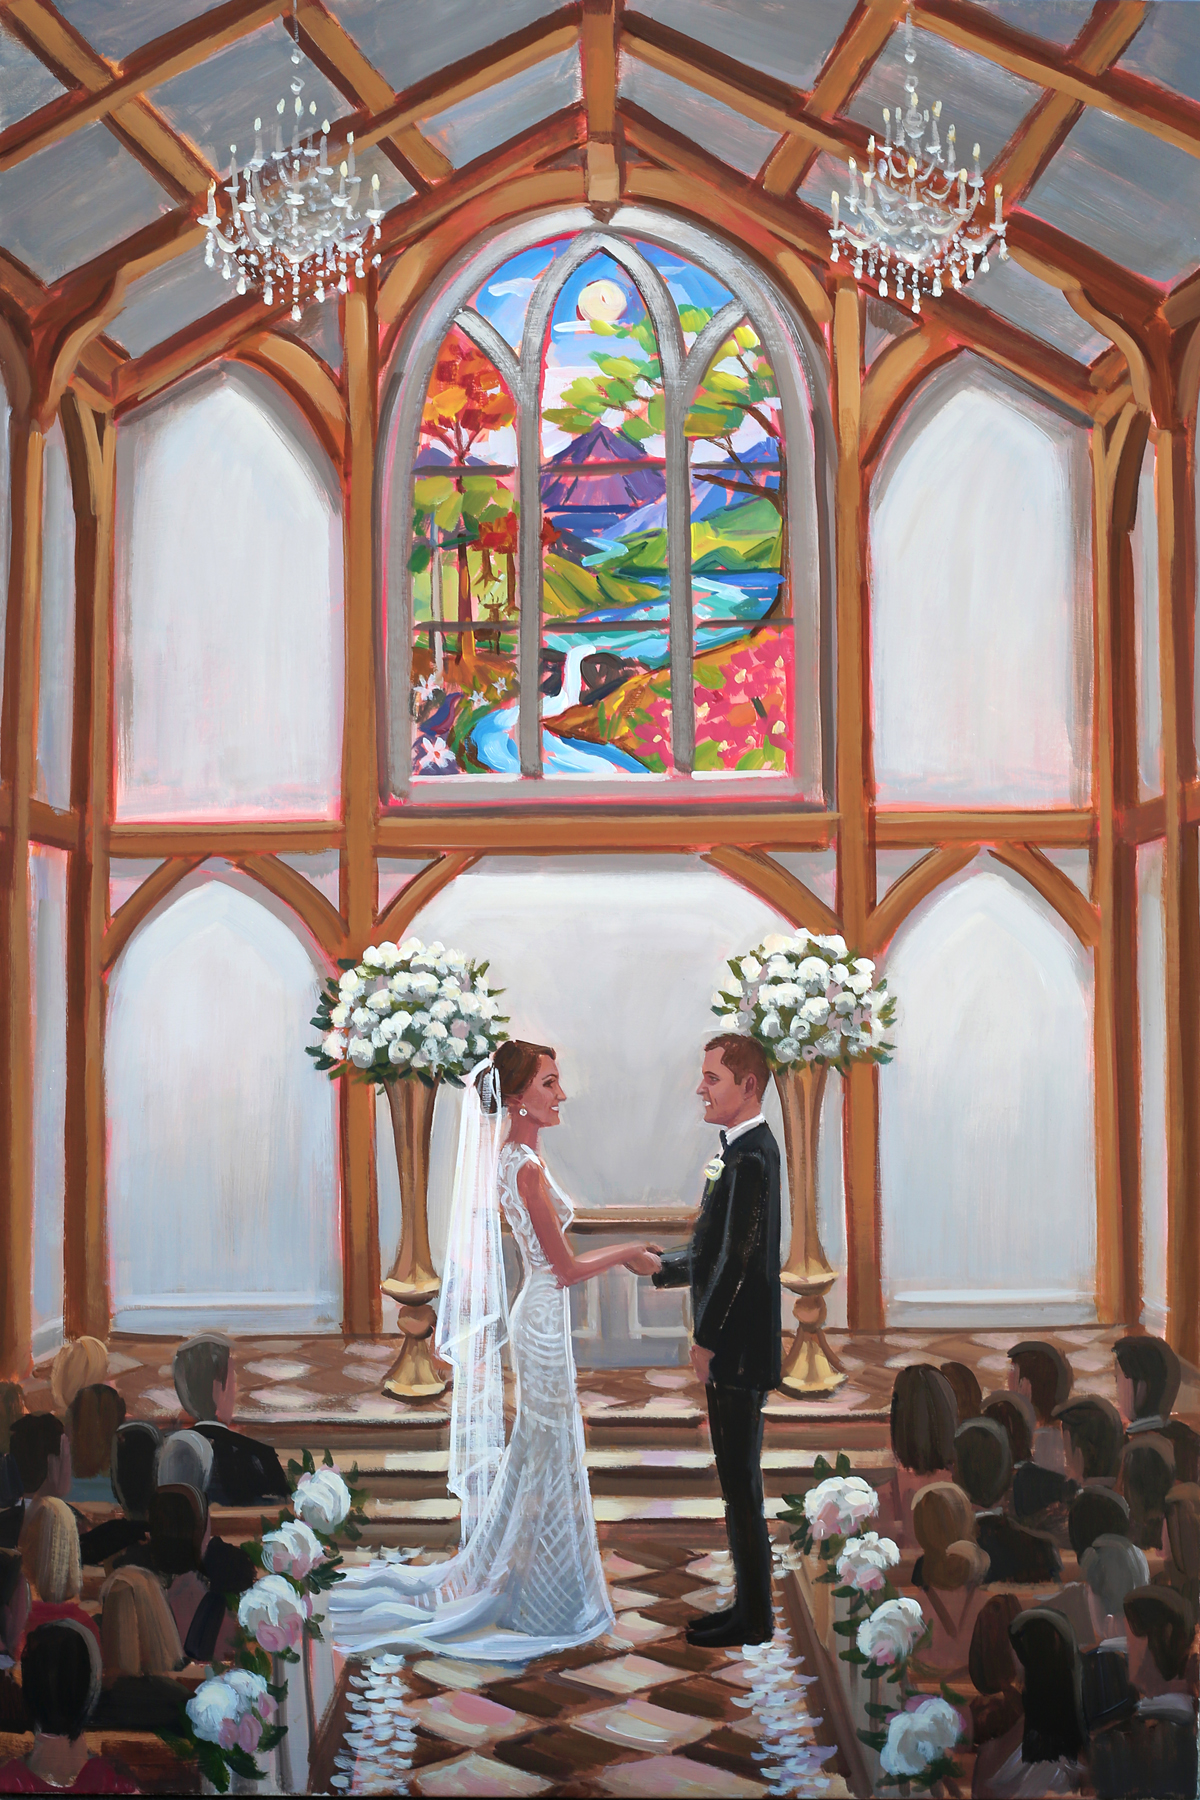 The new Chapel at The Greenbrier is what ceremony dreams are made of … and Ben so loved capturing Stephanie and Mark’s sweet moment as they said, I DO, with a live wedding painting!